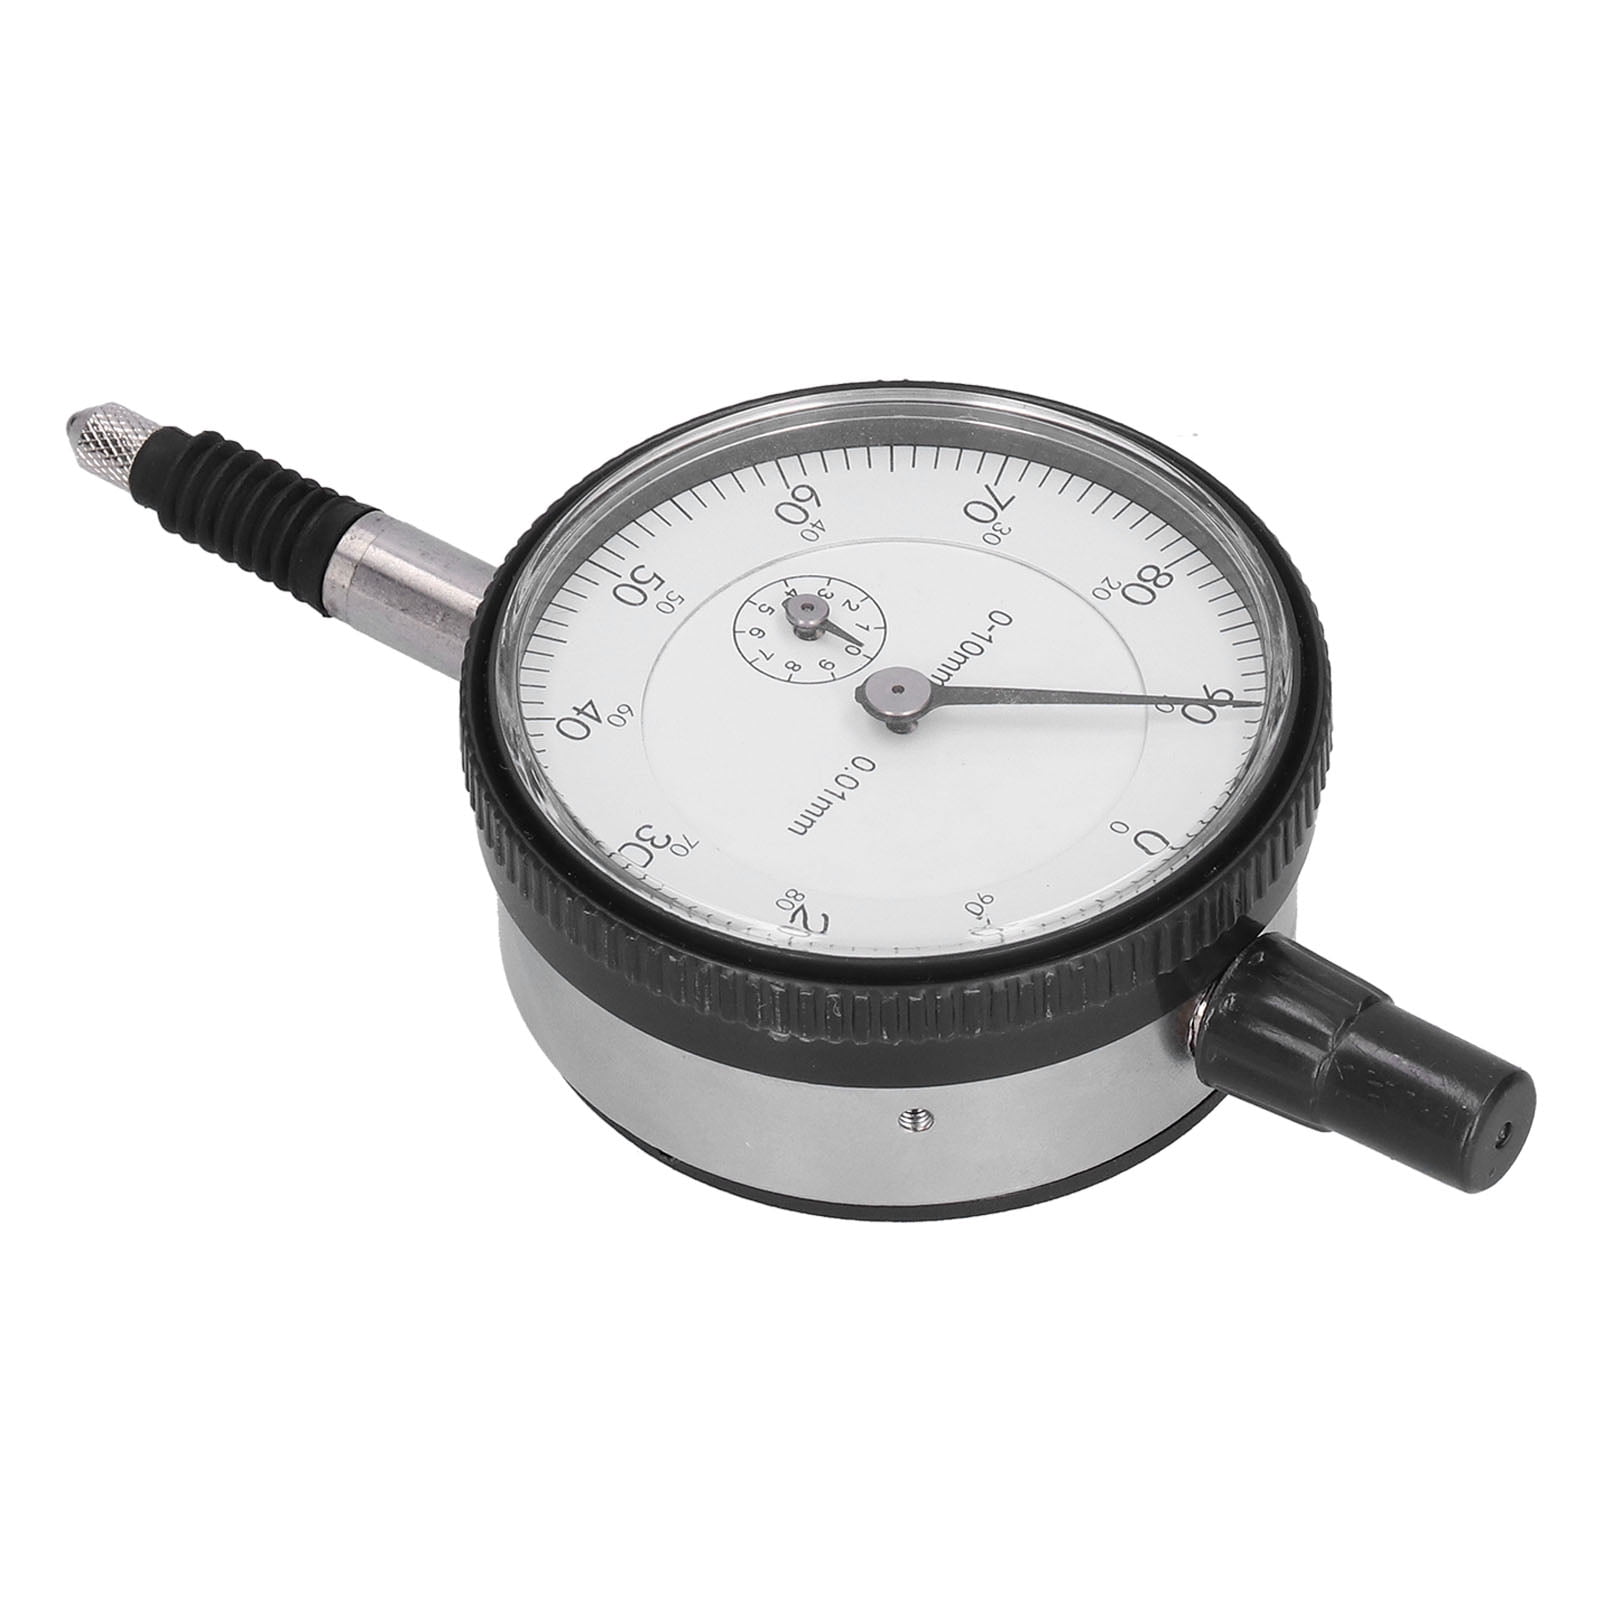 Dial Indicator 0-10mm Accuracy of 0.01mm high Precision Measuring Device Machinist Measuring Tool Durable and Nice